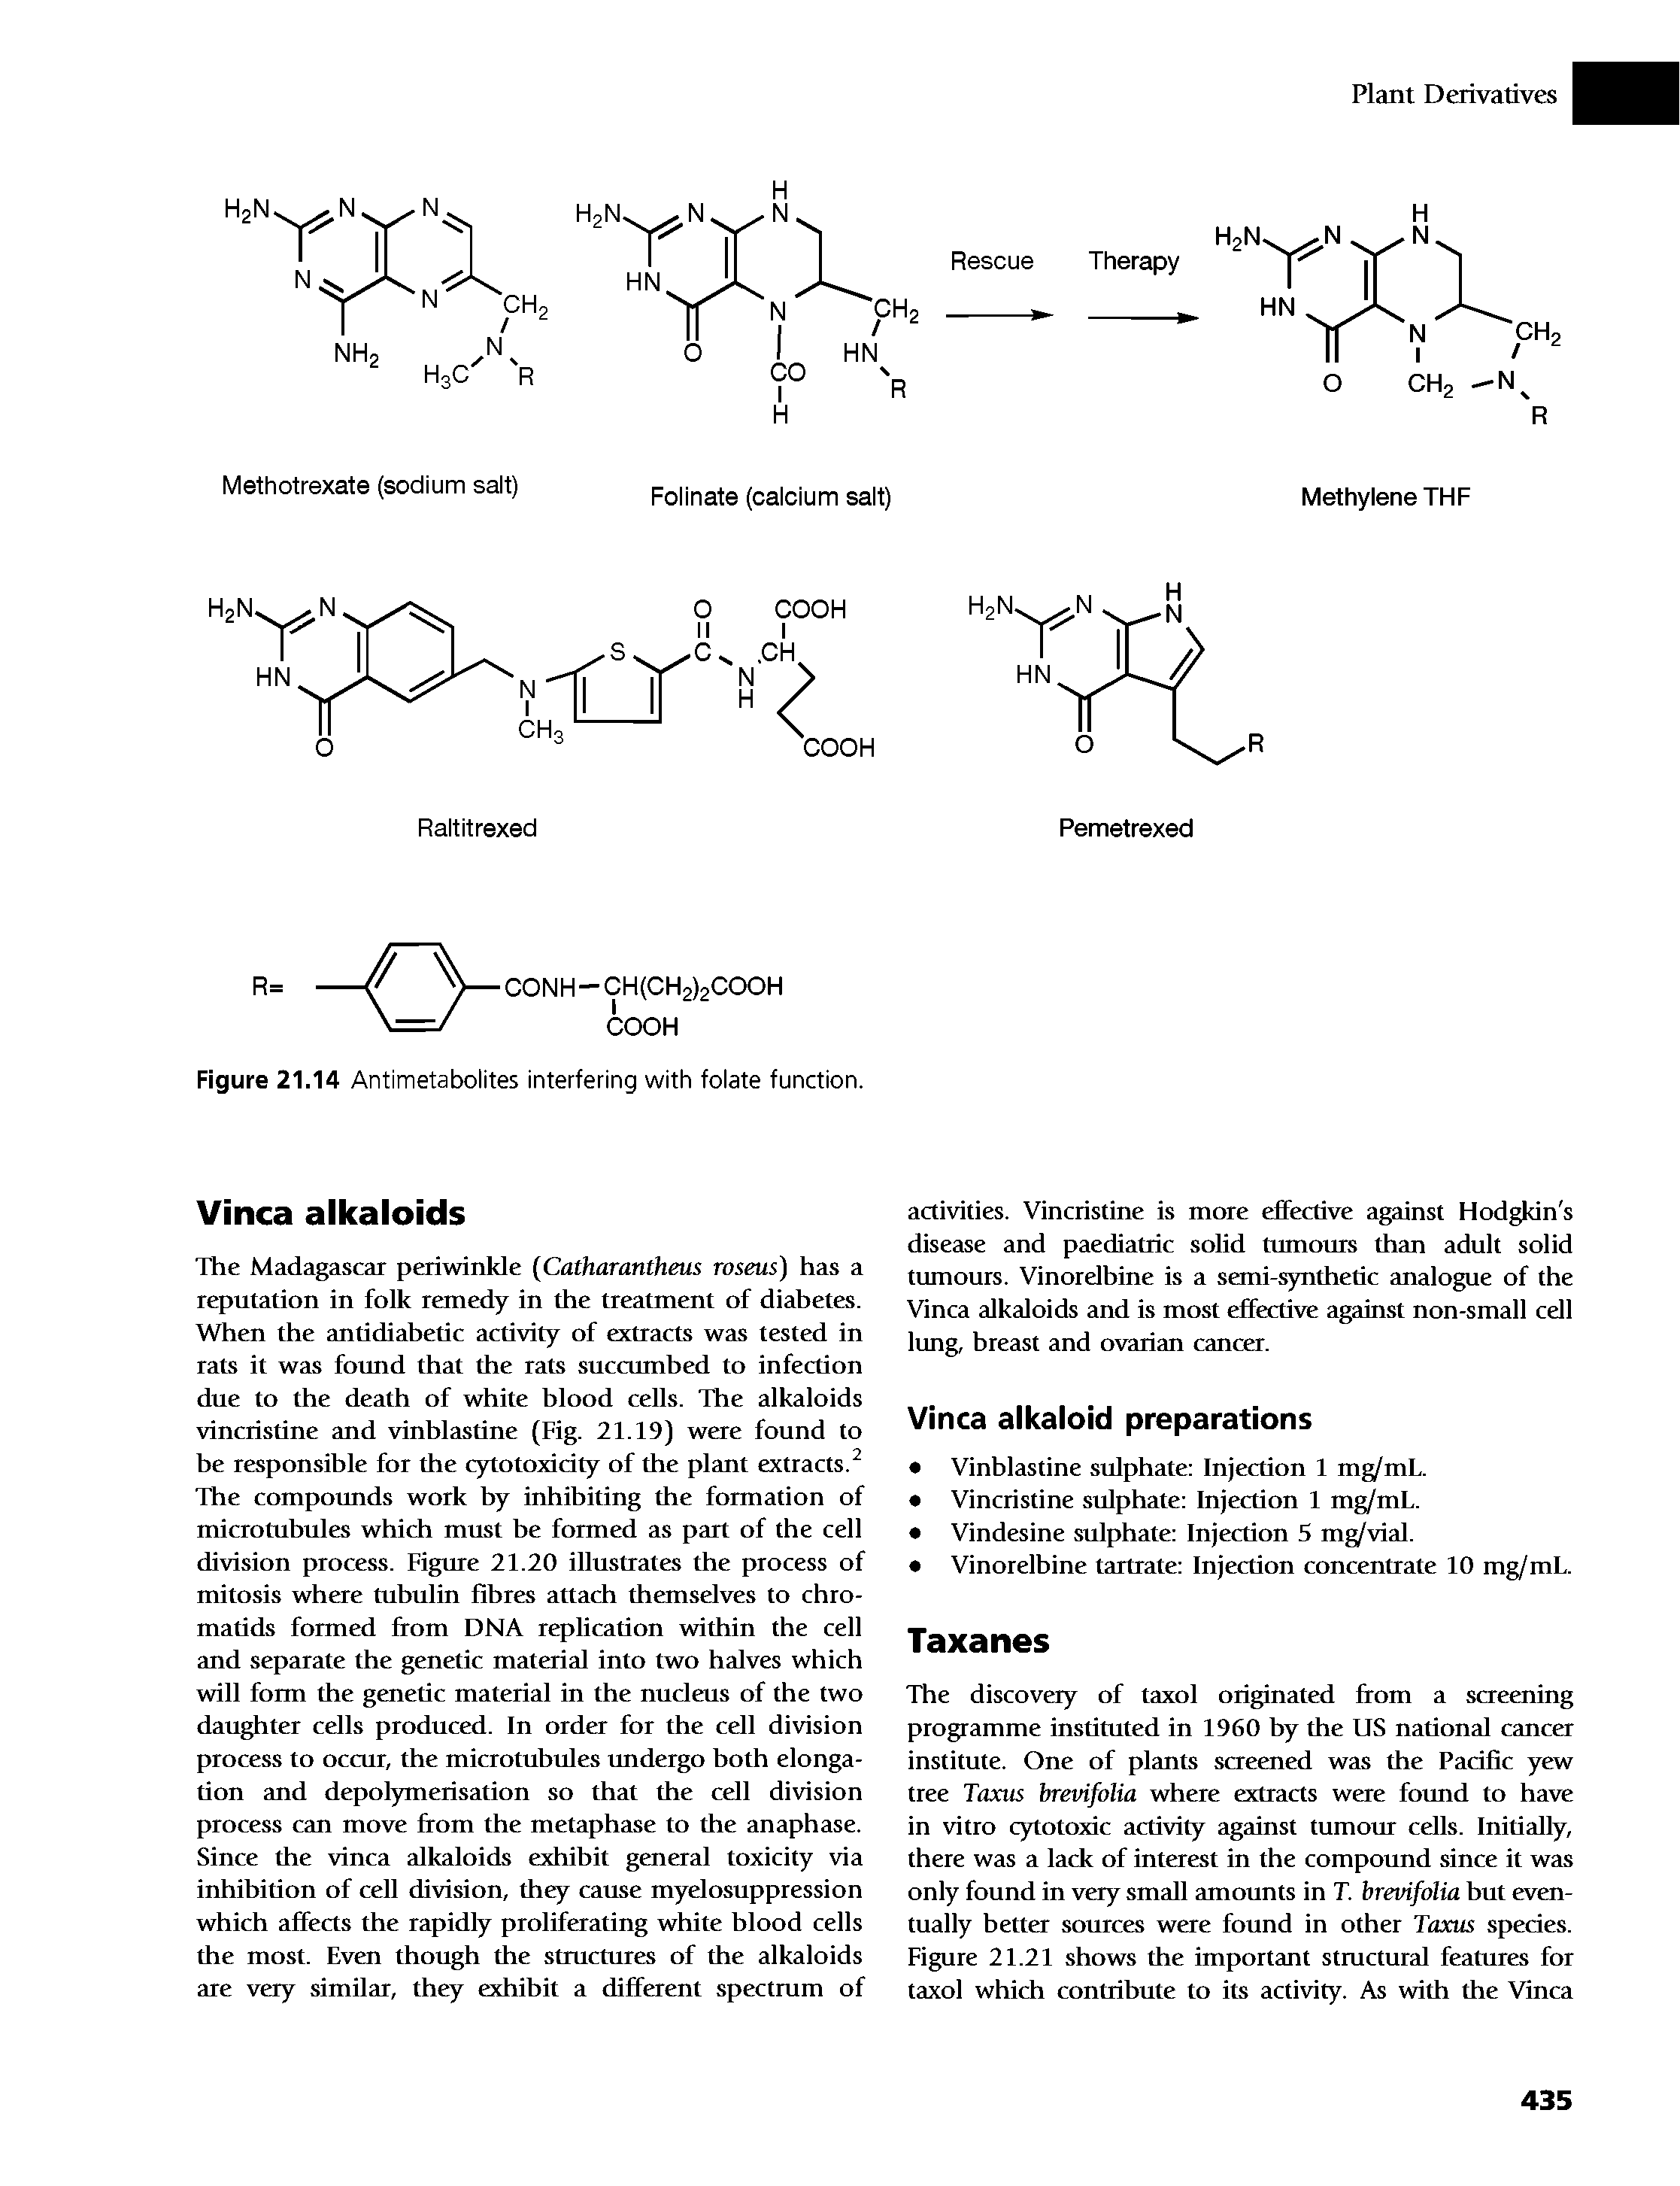 Figure 21.14 Antimetabolites interfering with folate function.